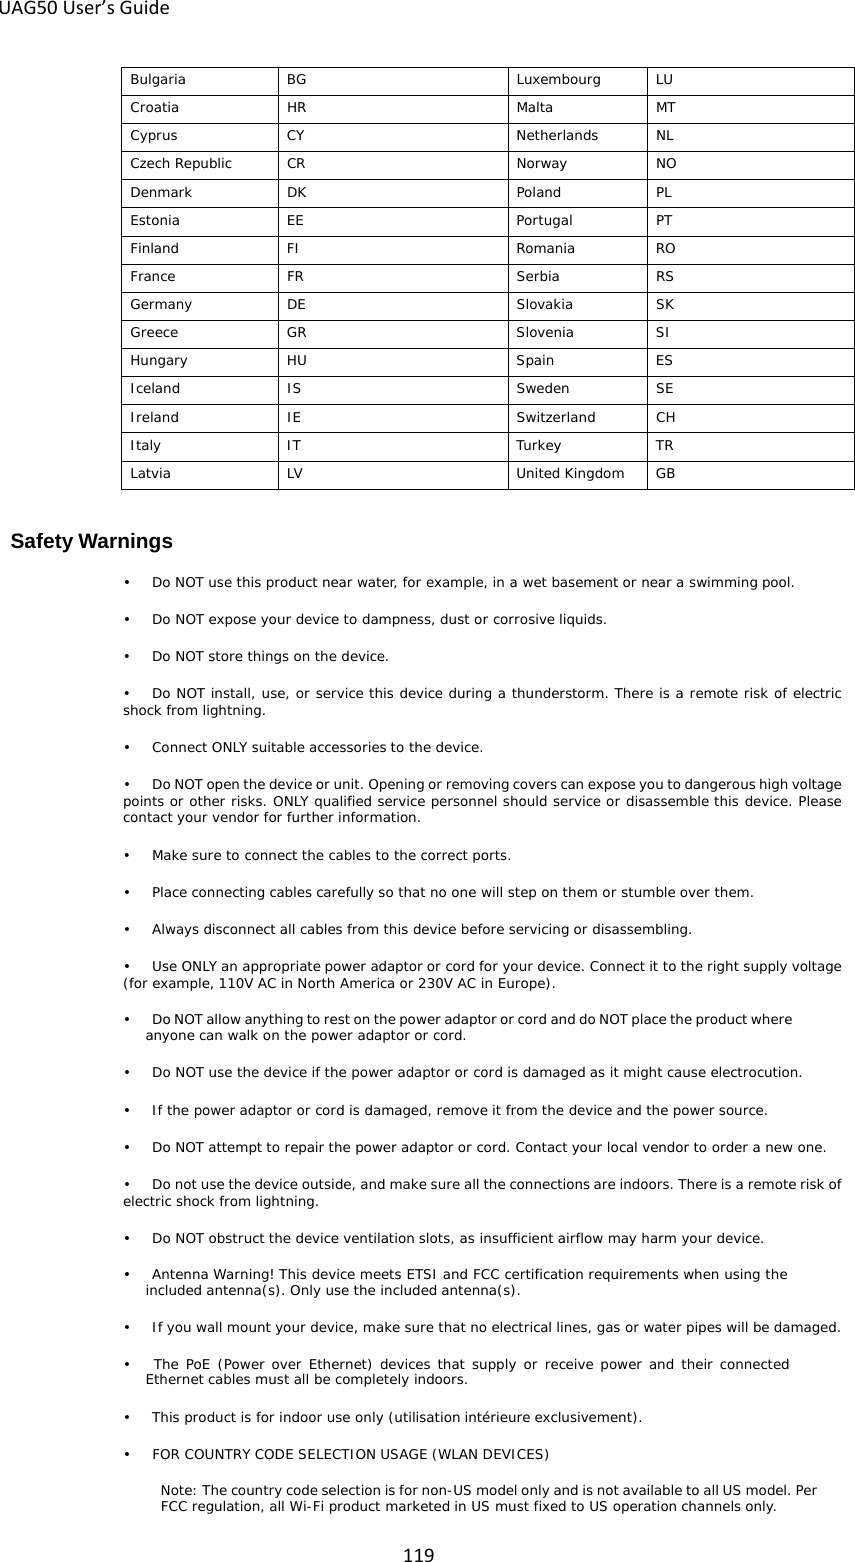 UAG50 User’s Guide  119 Bulgaria BG Luxembourg LU Croatia HR Malta MT Cyprus CY Netherlands NL Czech Republic CR Norway NO Denmark DK Poland PL Estonia EE Portugal PT Finland FI Romania RO France FR Serbia RS Germany DE Slovakia SK Greece GR Slovenia SI Hungary HU Spain ES Iceland IS Sweden SE Ireland IE Switzerland CH Italy IT Turkey TR Latvia LV United Kingdom GB  Safety Warnings •   Do NOT use this product near water, for example, in a wet basement or near a swimming pool. •   Do NOT expose your device to dampness, dust or corrosive liquids. •   Do NOT store things on the device. •   Do NOT install, use, or service this device during a thunderstorm. There is a remote risk of electric shock from lightning. •    Connect ONLY suitable accessories to the device. •   Do NOT open the device or unit. Opening or removing covers can expose you to dangerous high voltage points or other risks. ONLY qualified service personnel should service or disassemble this device. Please contact your vendor for further information. •    Make sure to connect the cables to the correct ports. •   Place connecting cables carefully so that no one will step on them or stumble over them. •   Always disconnect all cables from this device before servicing or disassembling. •    Use ONLY an appropriate power adaptor or cord for your device. Connect it to the right supply voltage (for example, 110V AC in North America or 230V AC in Europe). •   Do NOT allow anything to rest on the power adaptor or cord and do NOT place the product where anyone can walk on the power adaptor or cord. •   Do NOT use the device if the power adaptor or cord is damaged as it might cause electrocution. •    If the power adaptor or cord is damaged, remove it from the device and the power source. •   Do NOT attempt to repair the power adaptor or cord. Contact your local vendor to order a new one. •   Do not use the device outside, and make sure all the connections are indoors. There is a remote risk of electric shock from lightning. •   Do NOT obstruct the device ventilation slots, as insufficient airflow may harm your device. •   Antenna Warning! This device meets ETSI and FCC certification requirements when using the included antenna(s). Only use the included antenna(s). •    If you wall mount your device, make sure that no electrical lines, gas or water pipes will be damaged. •    The PoE (Power over Ethernet) devices that supply or receive power  and their connected Ethernet cables must all be completely indoors. •    This product is for indoor use only (utilisation intérieure exclusivement). •   FOR COUNTRY CODE SELECTION USAGE (WLAN DEVICES) Note: The country code selection is for non-US model only and is not available to all US model. Per FCC regulation, all Wi-Fi product marketed in US must fixed to US operation channels only. 